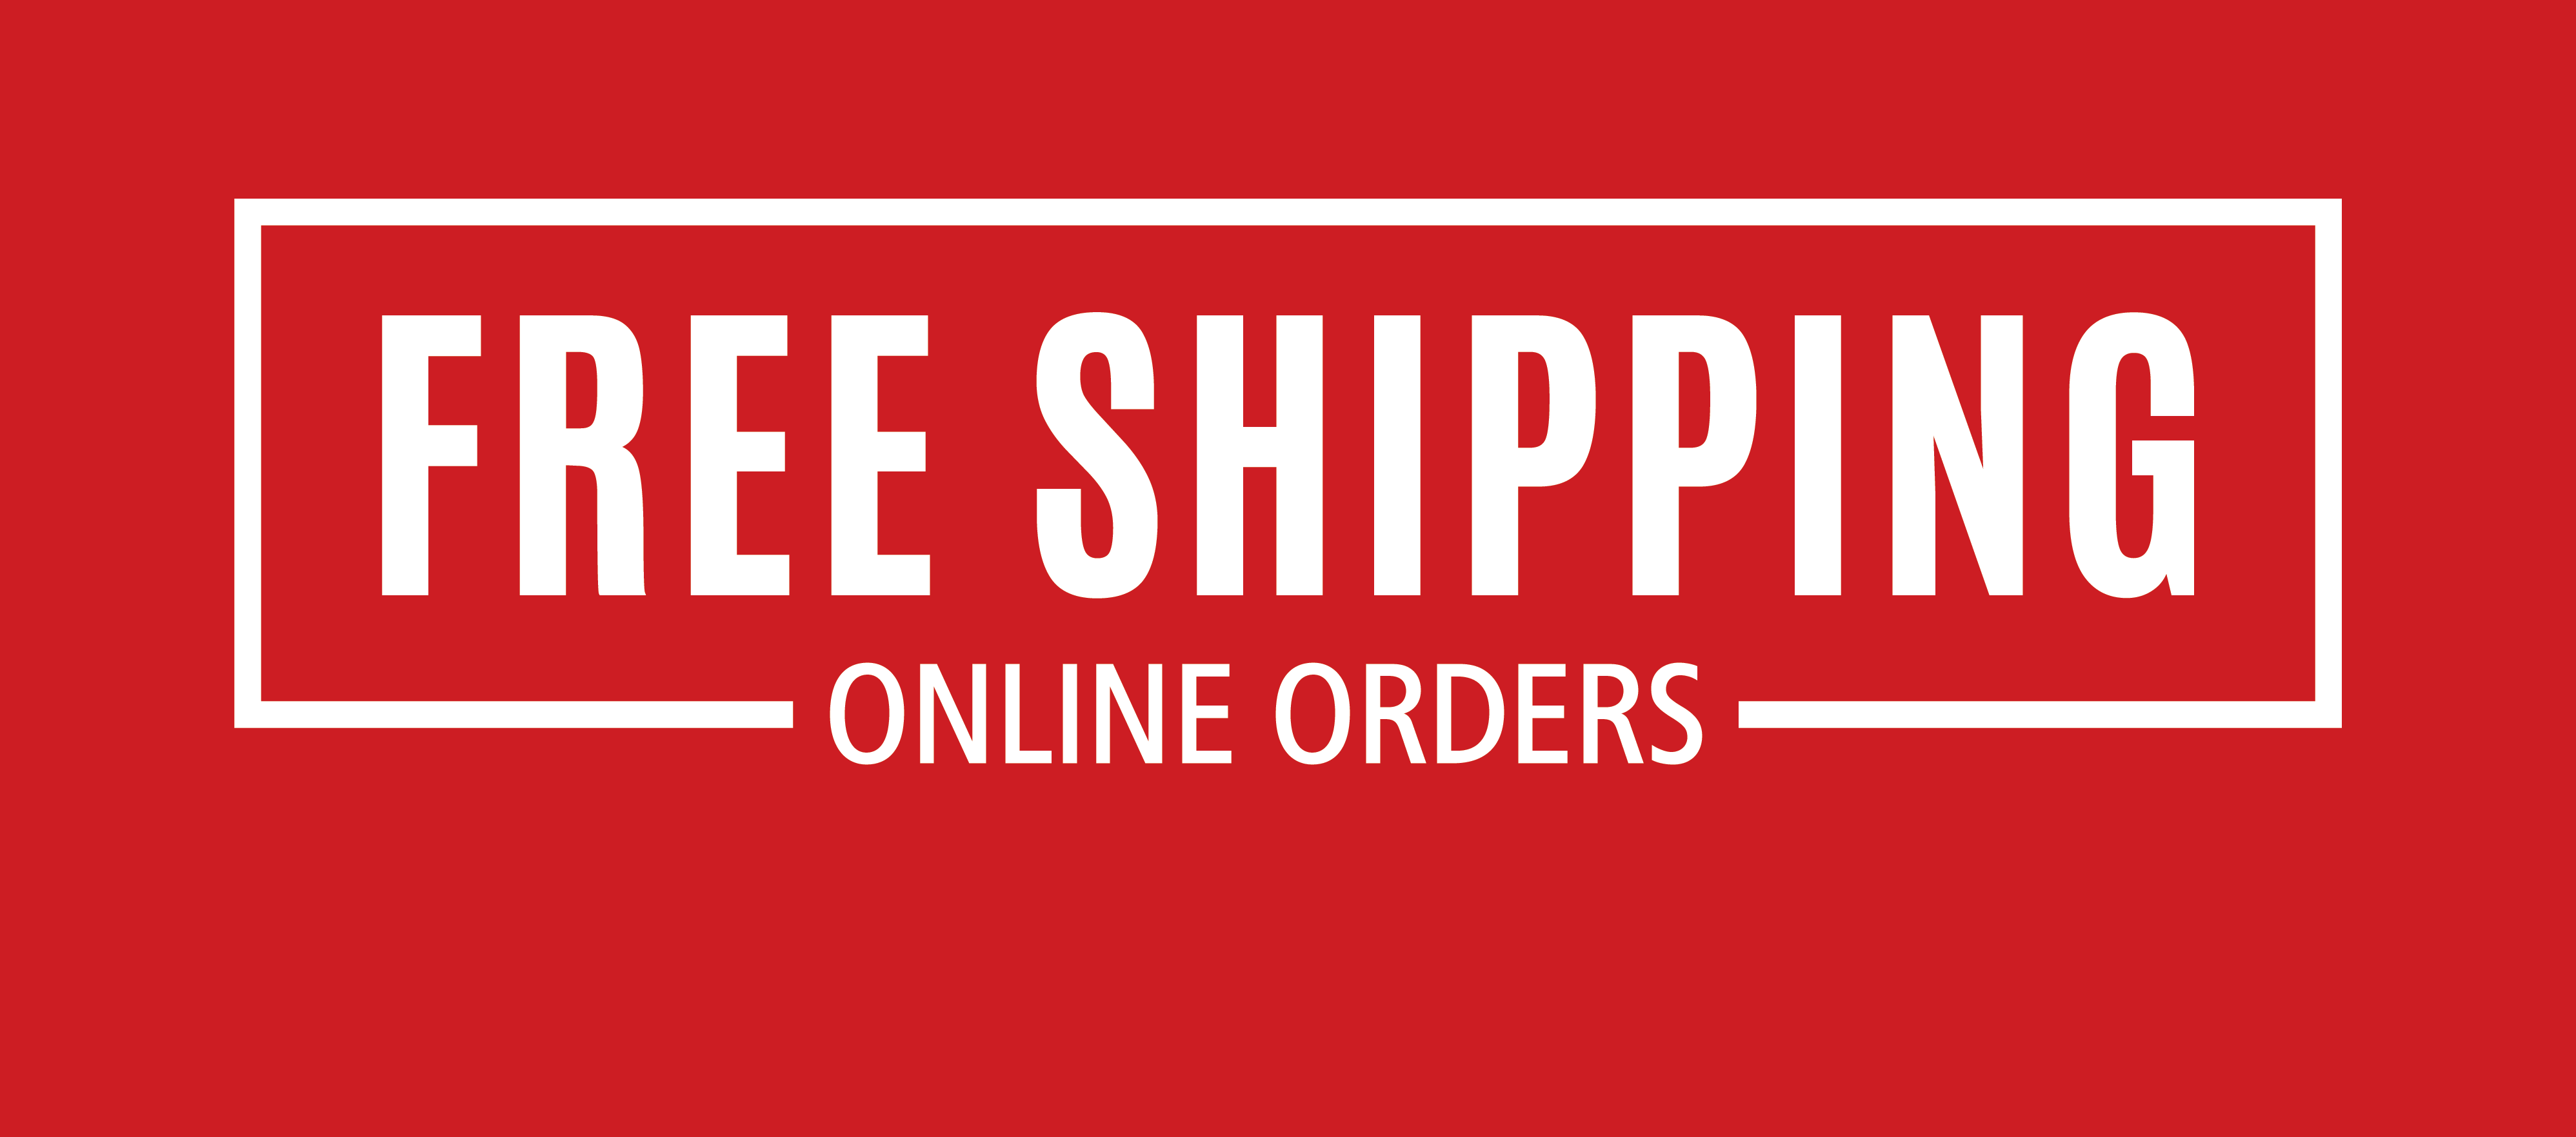 Free Shipping for Online Product Orders: Now through 10/31/2022